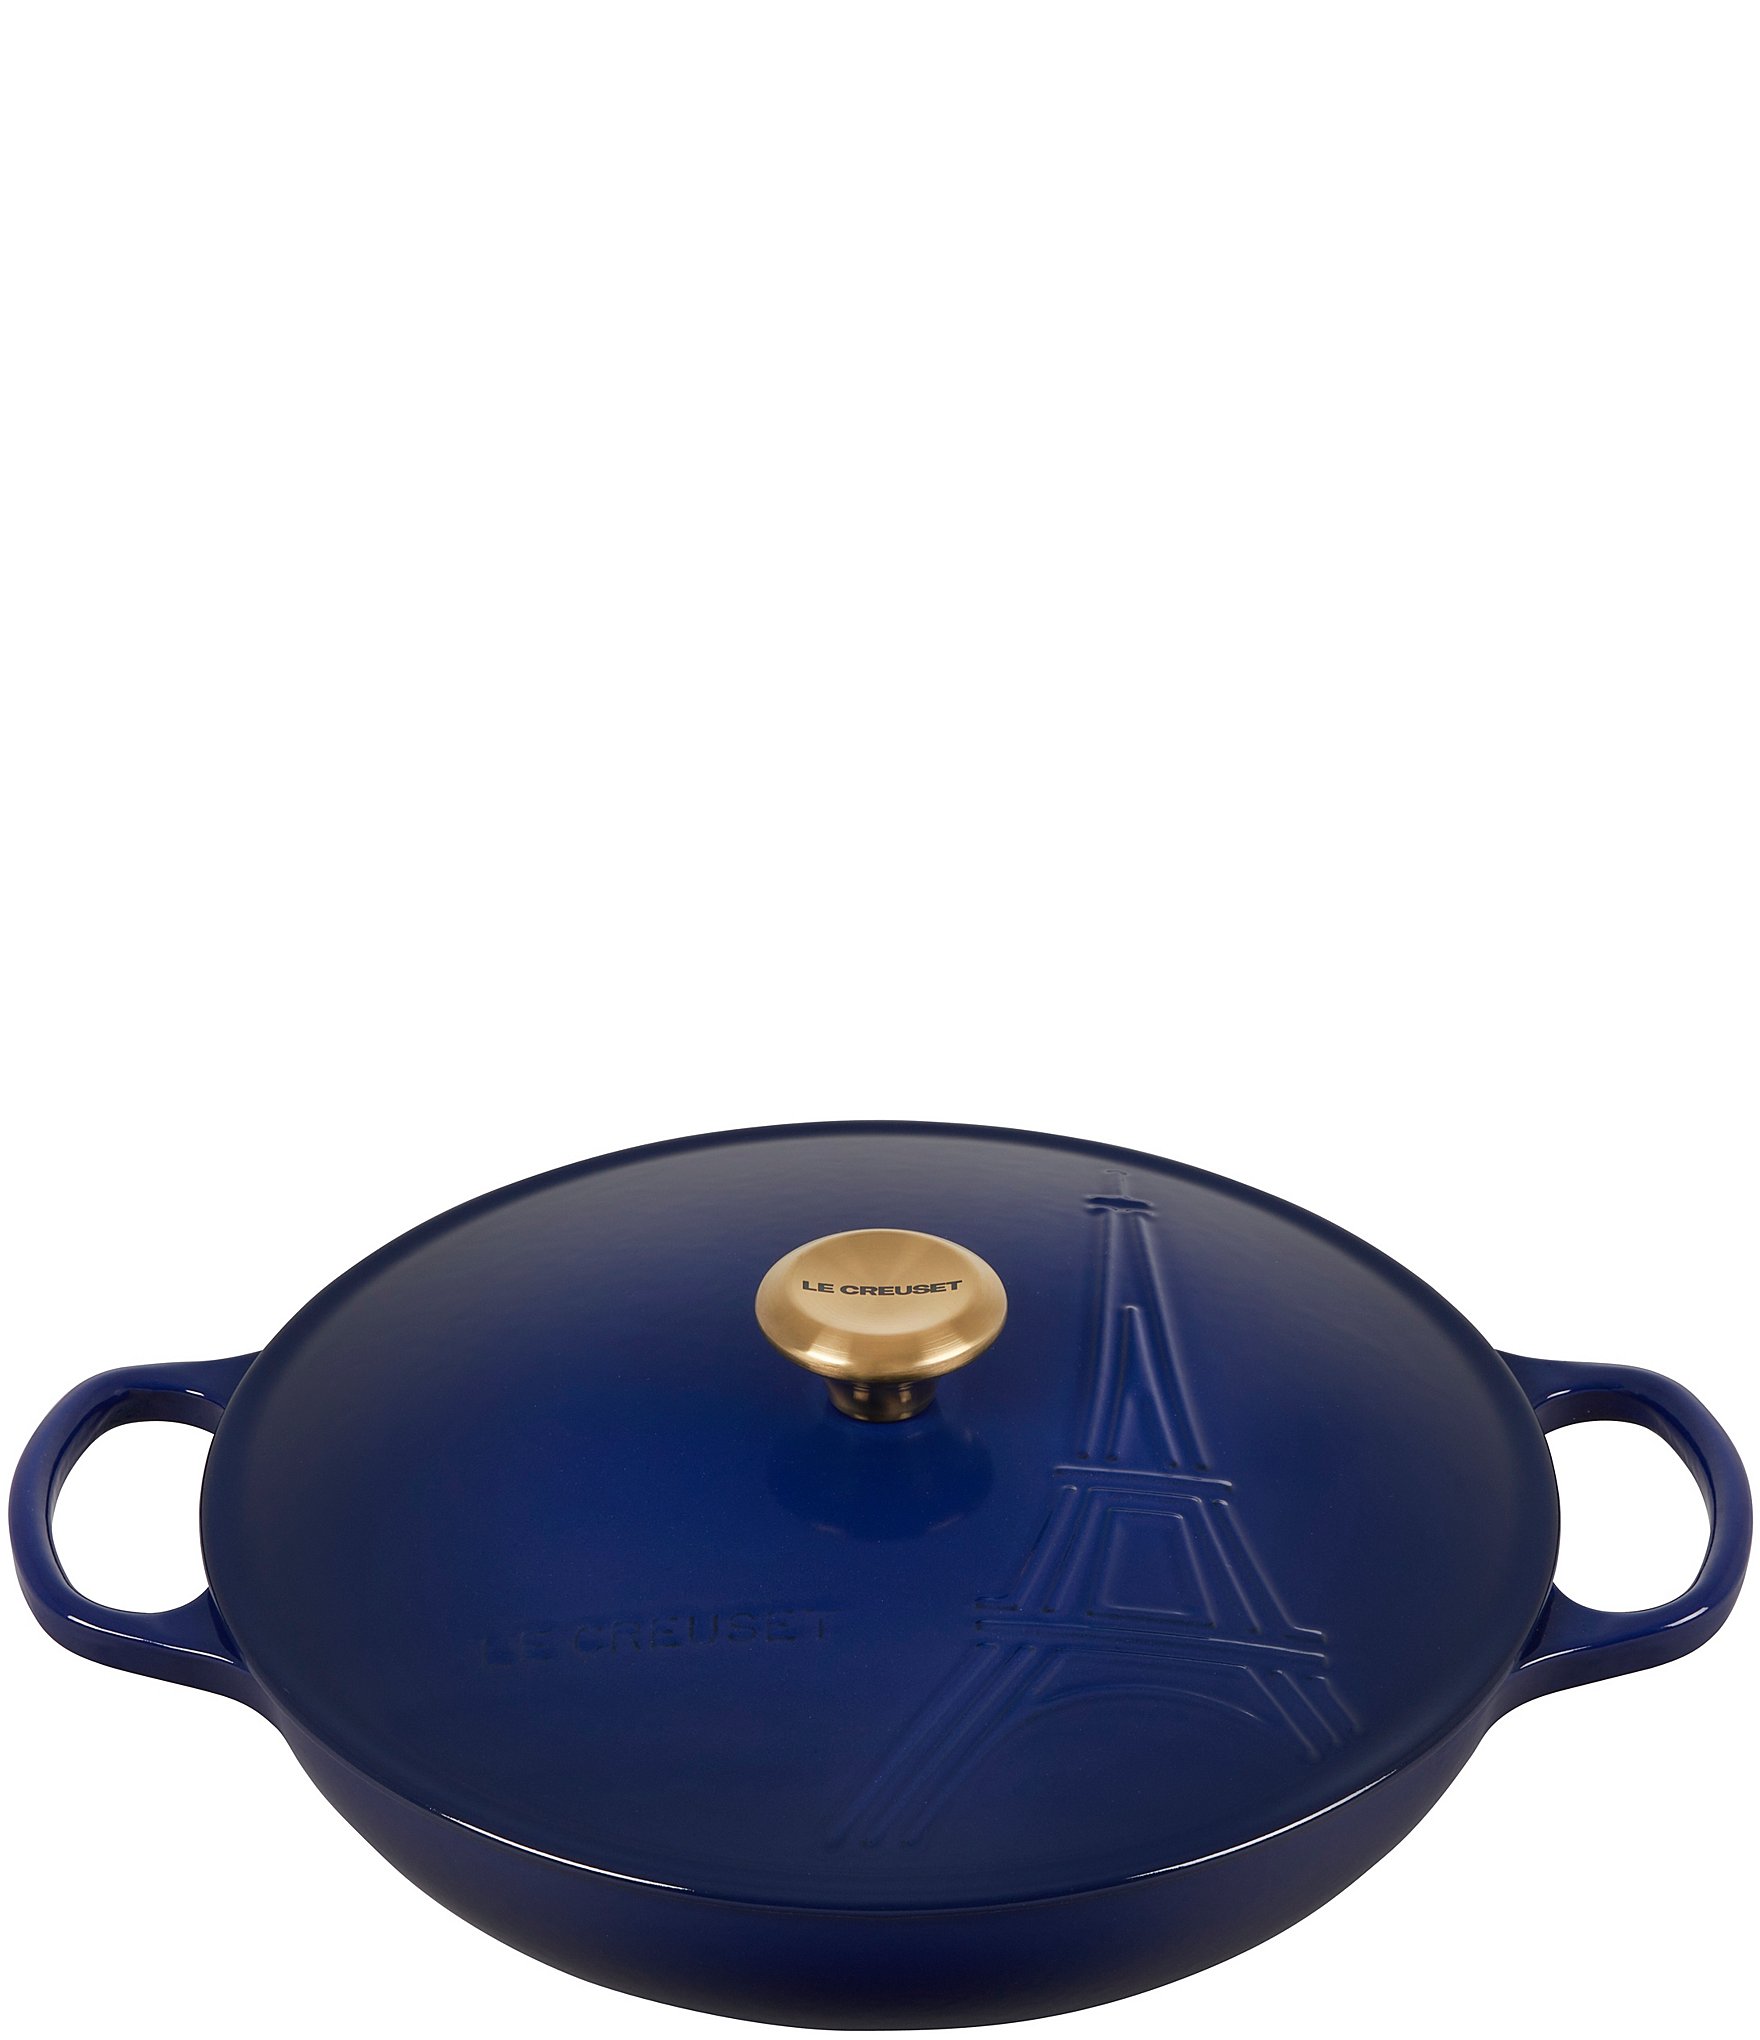 Le Creuset just released the prettiest Indigo color for its fall